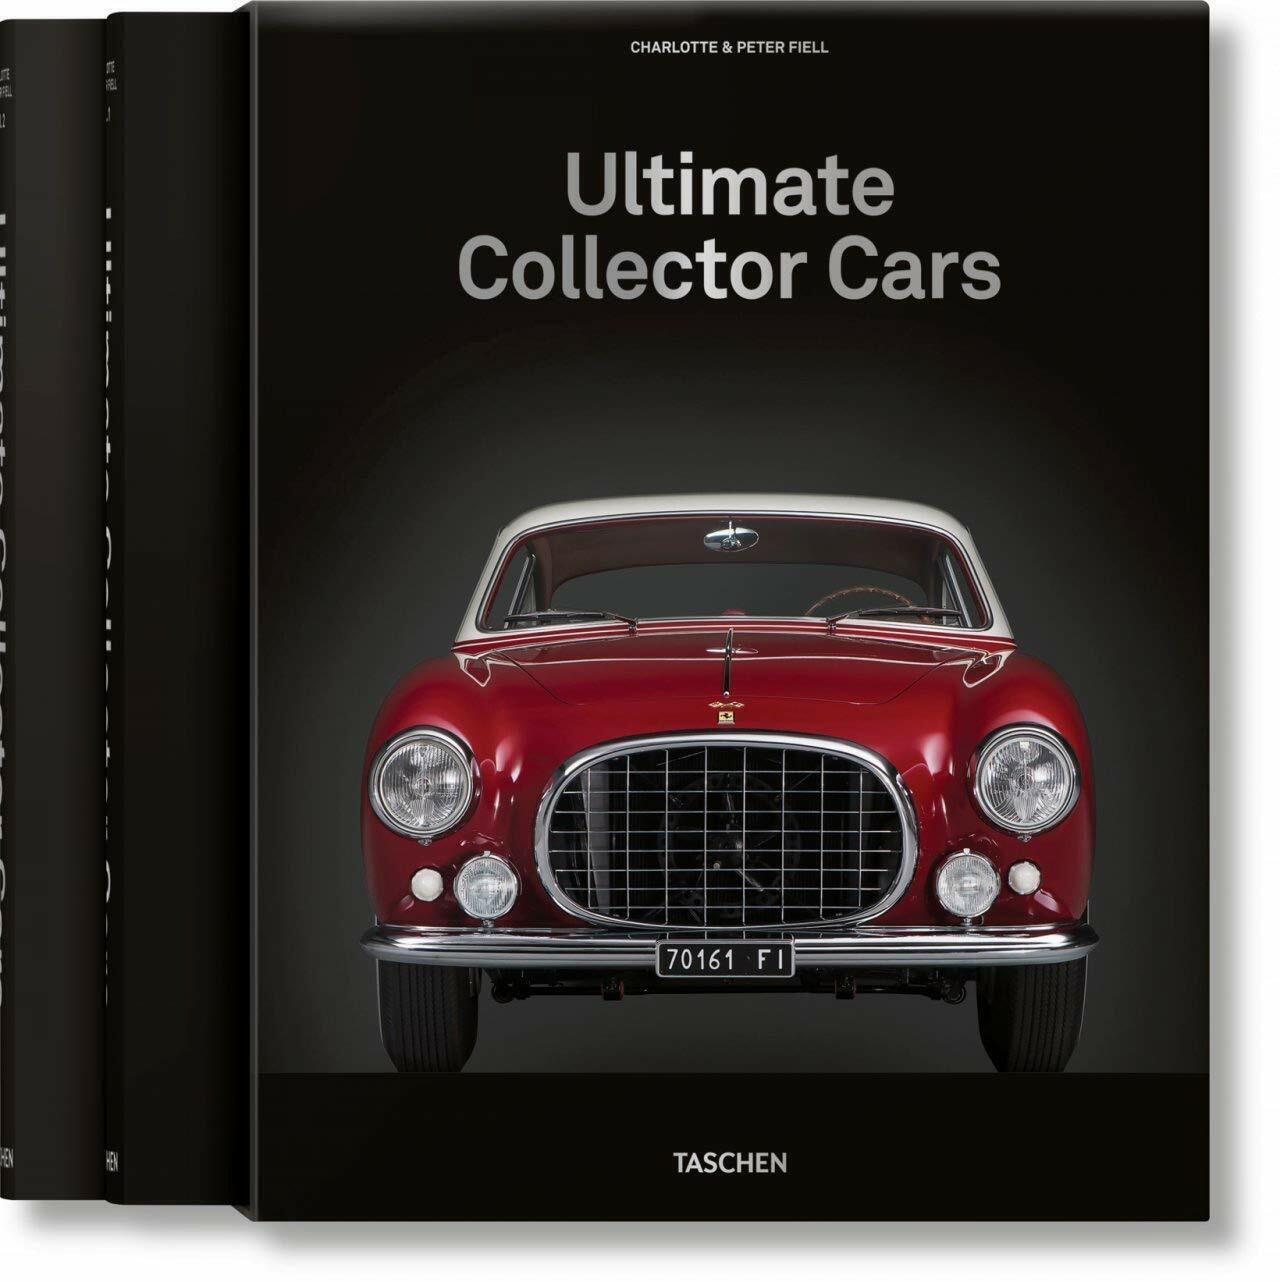 Ultimate Collector Cars - C&P FIELL - Taschen, 2021 